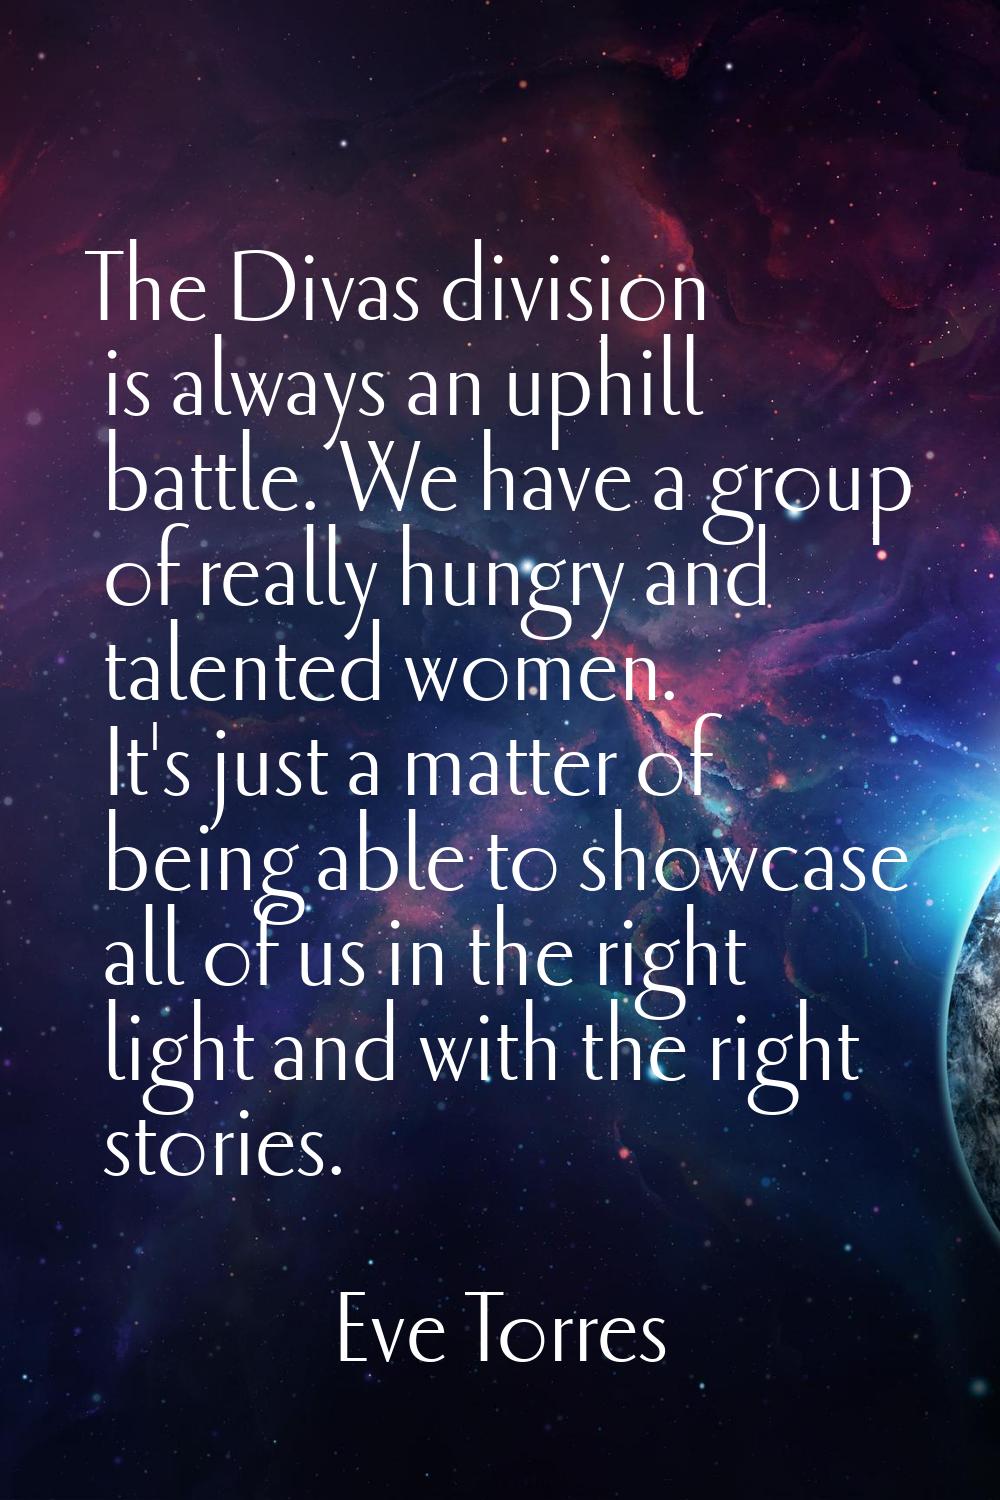 The Divas division is always an uphill battle. We have a group of really hungry and talented women.